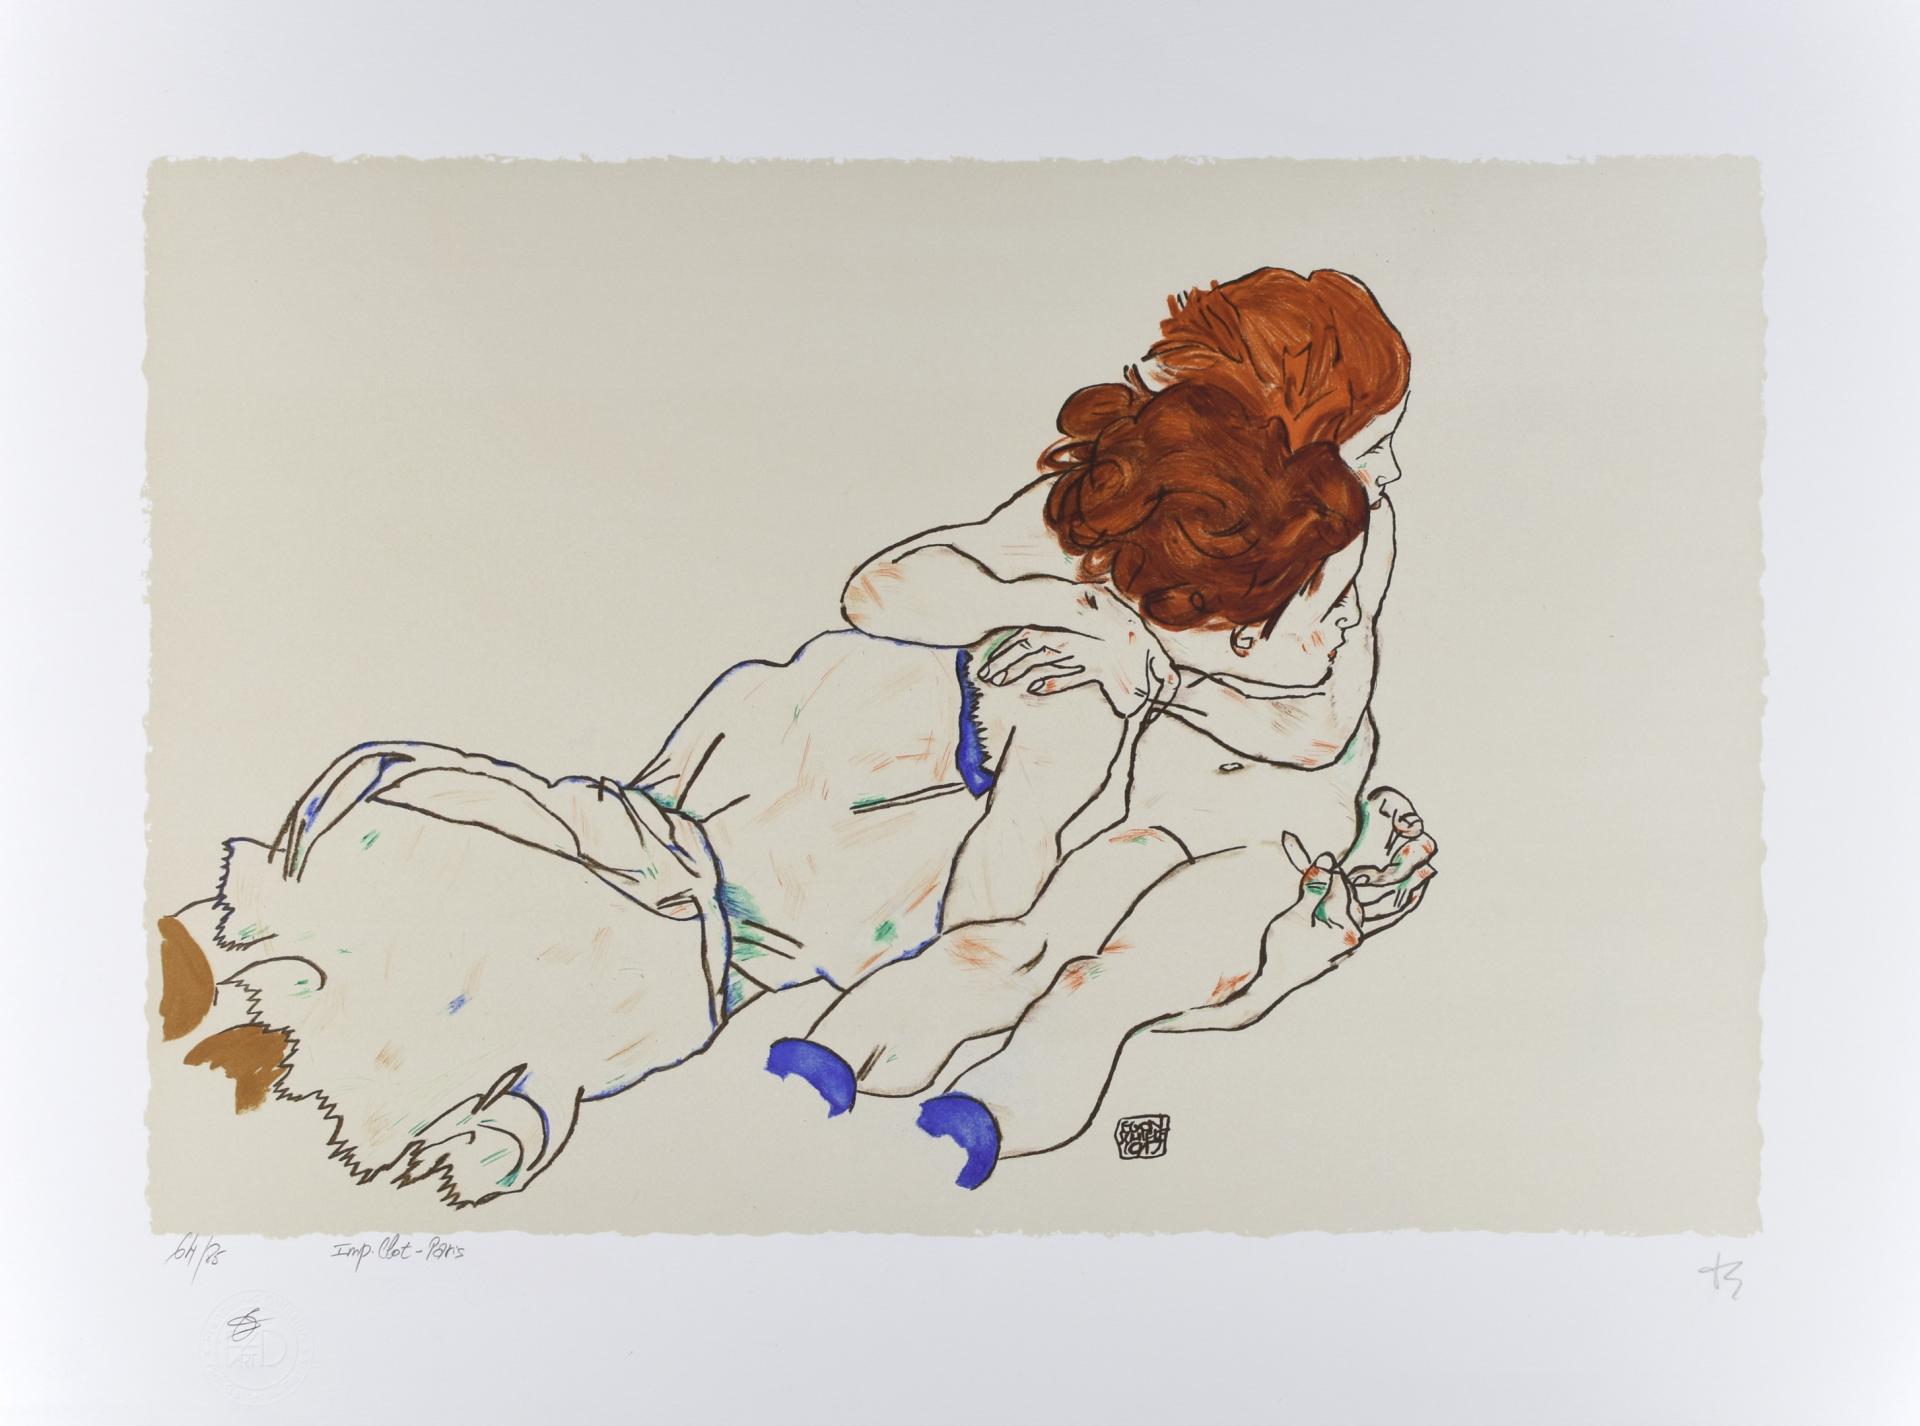 EGON SCHIELE | The Flight, 1917 / Mutter mit Kind / Mother with child,1917 | Lithograph